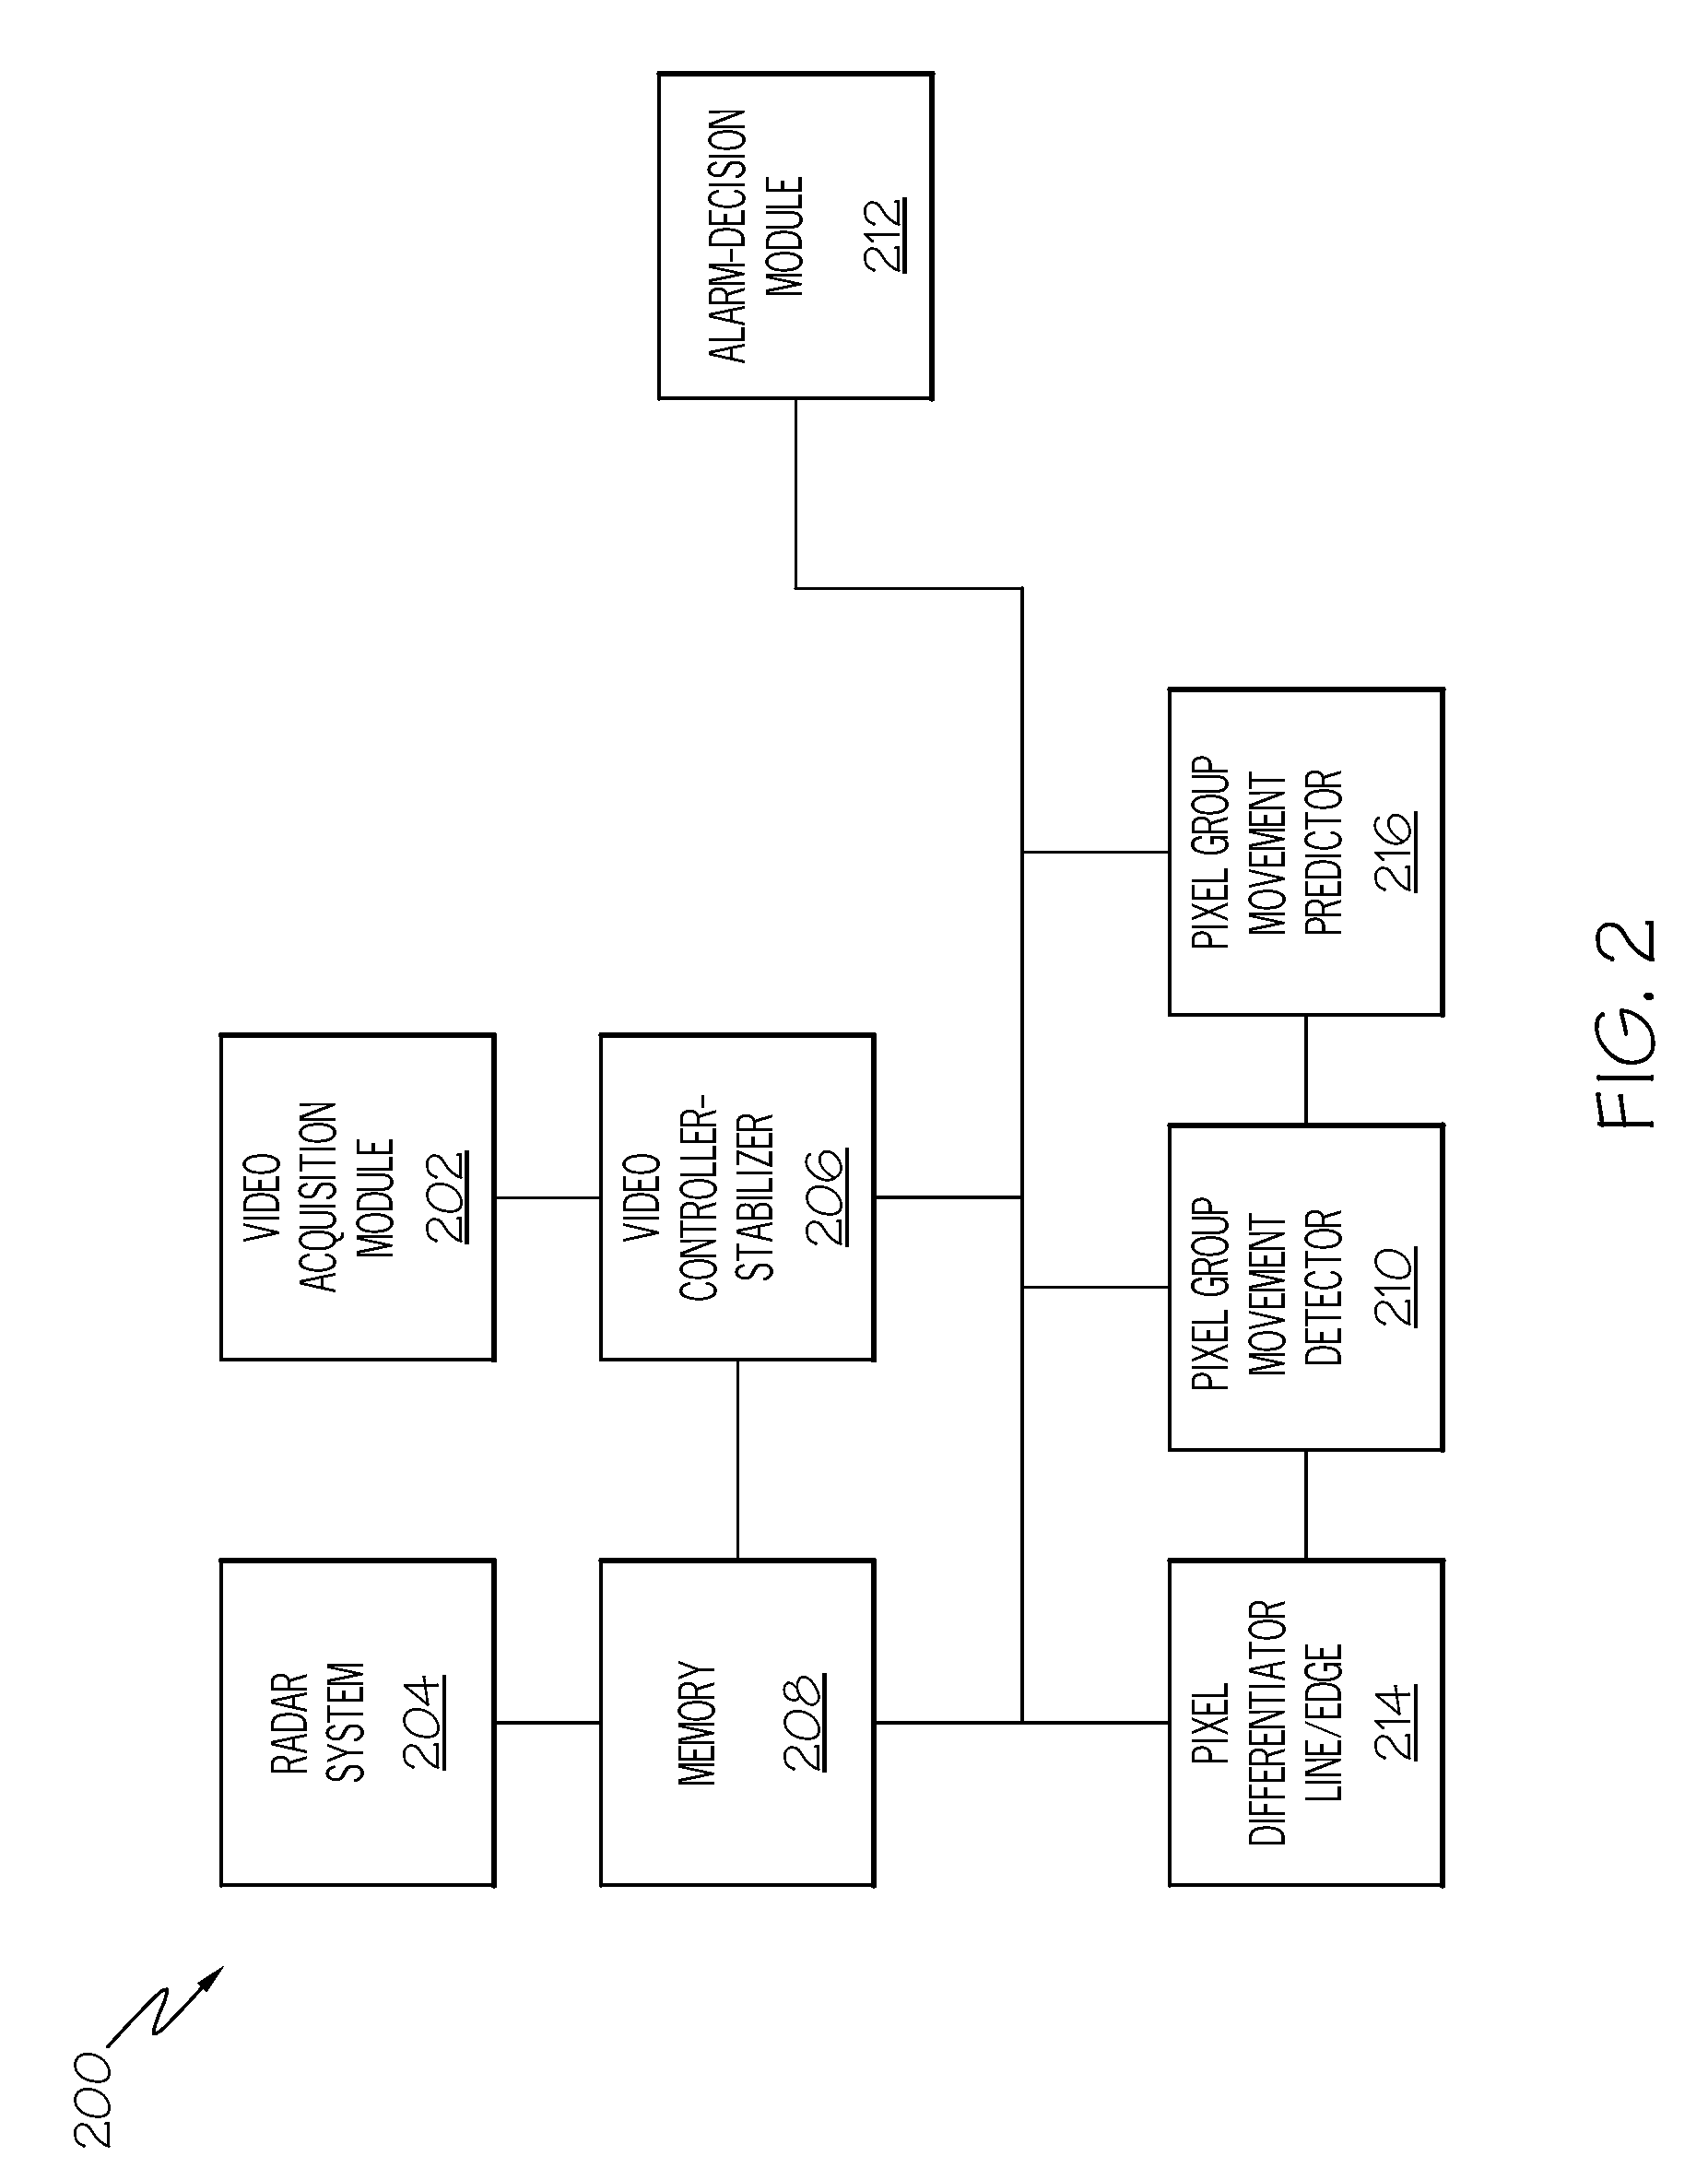 Systems and arrangements for providing situational awareness to an operator of a vehicle